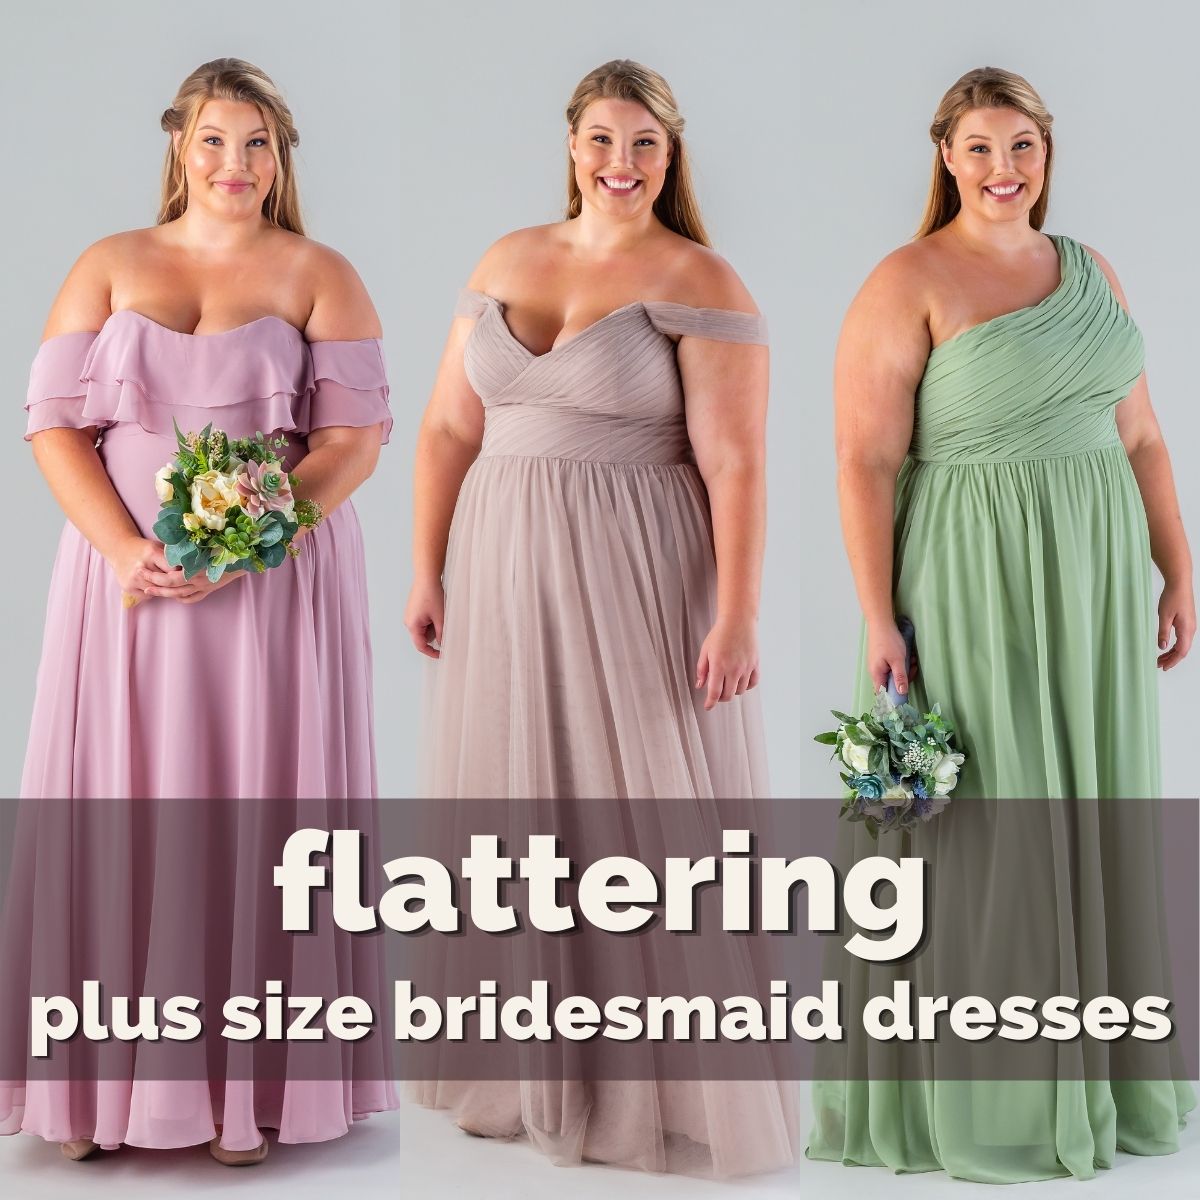 Plus Size Bridesmaid Dresses to Complement Your – Wedding